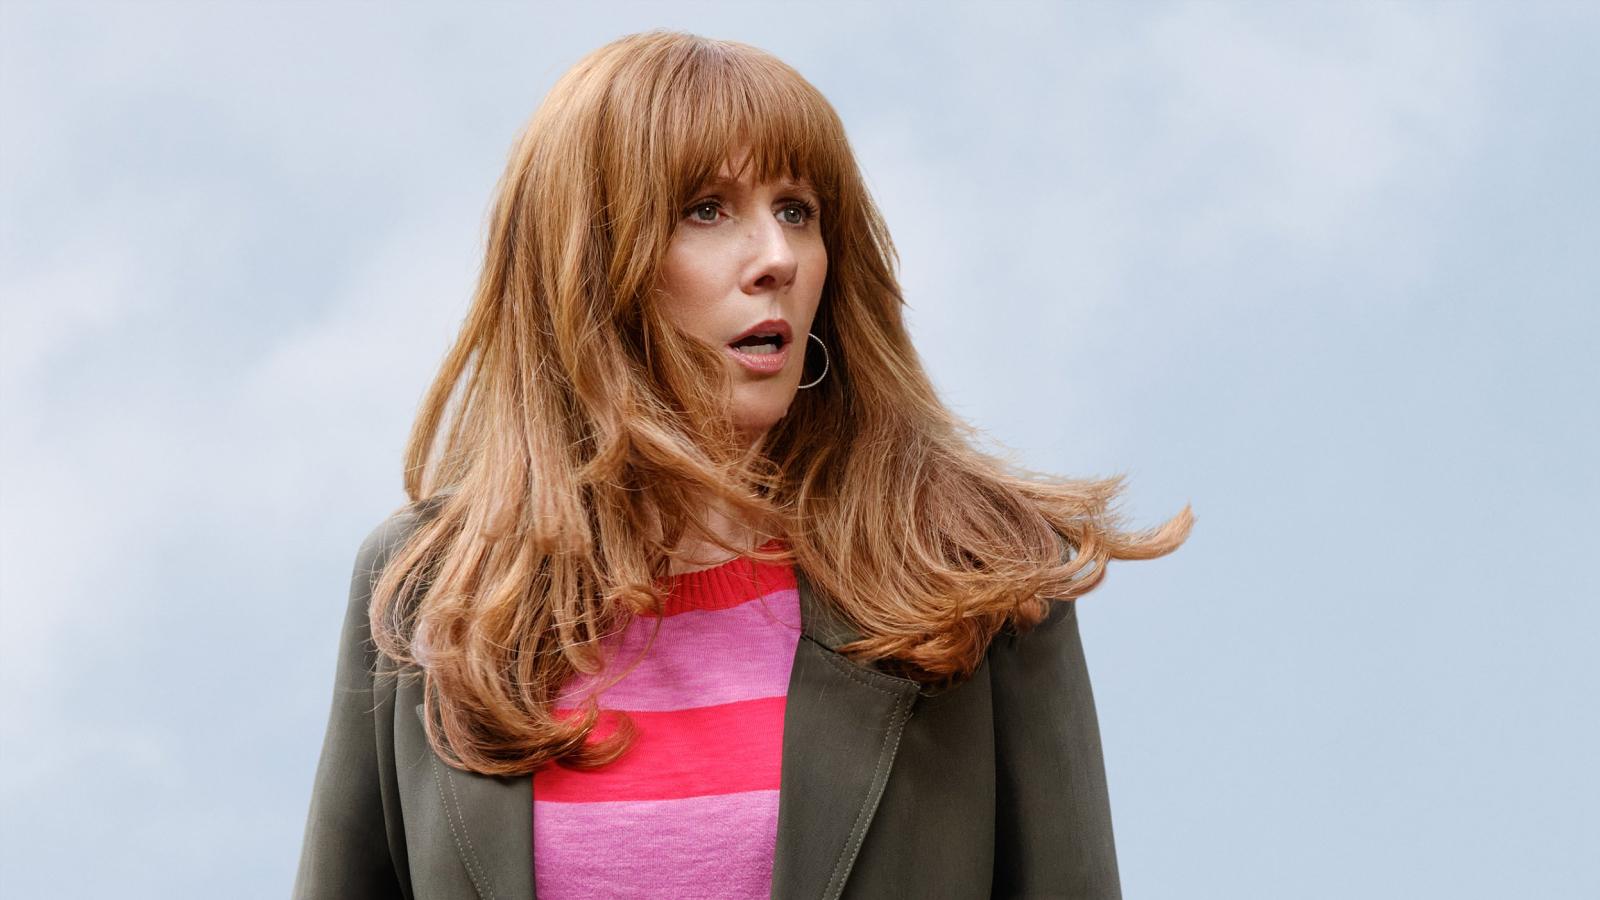 Catherine Tate as Donna Noble in the Doctor Who 60th anniversary specials.